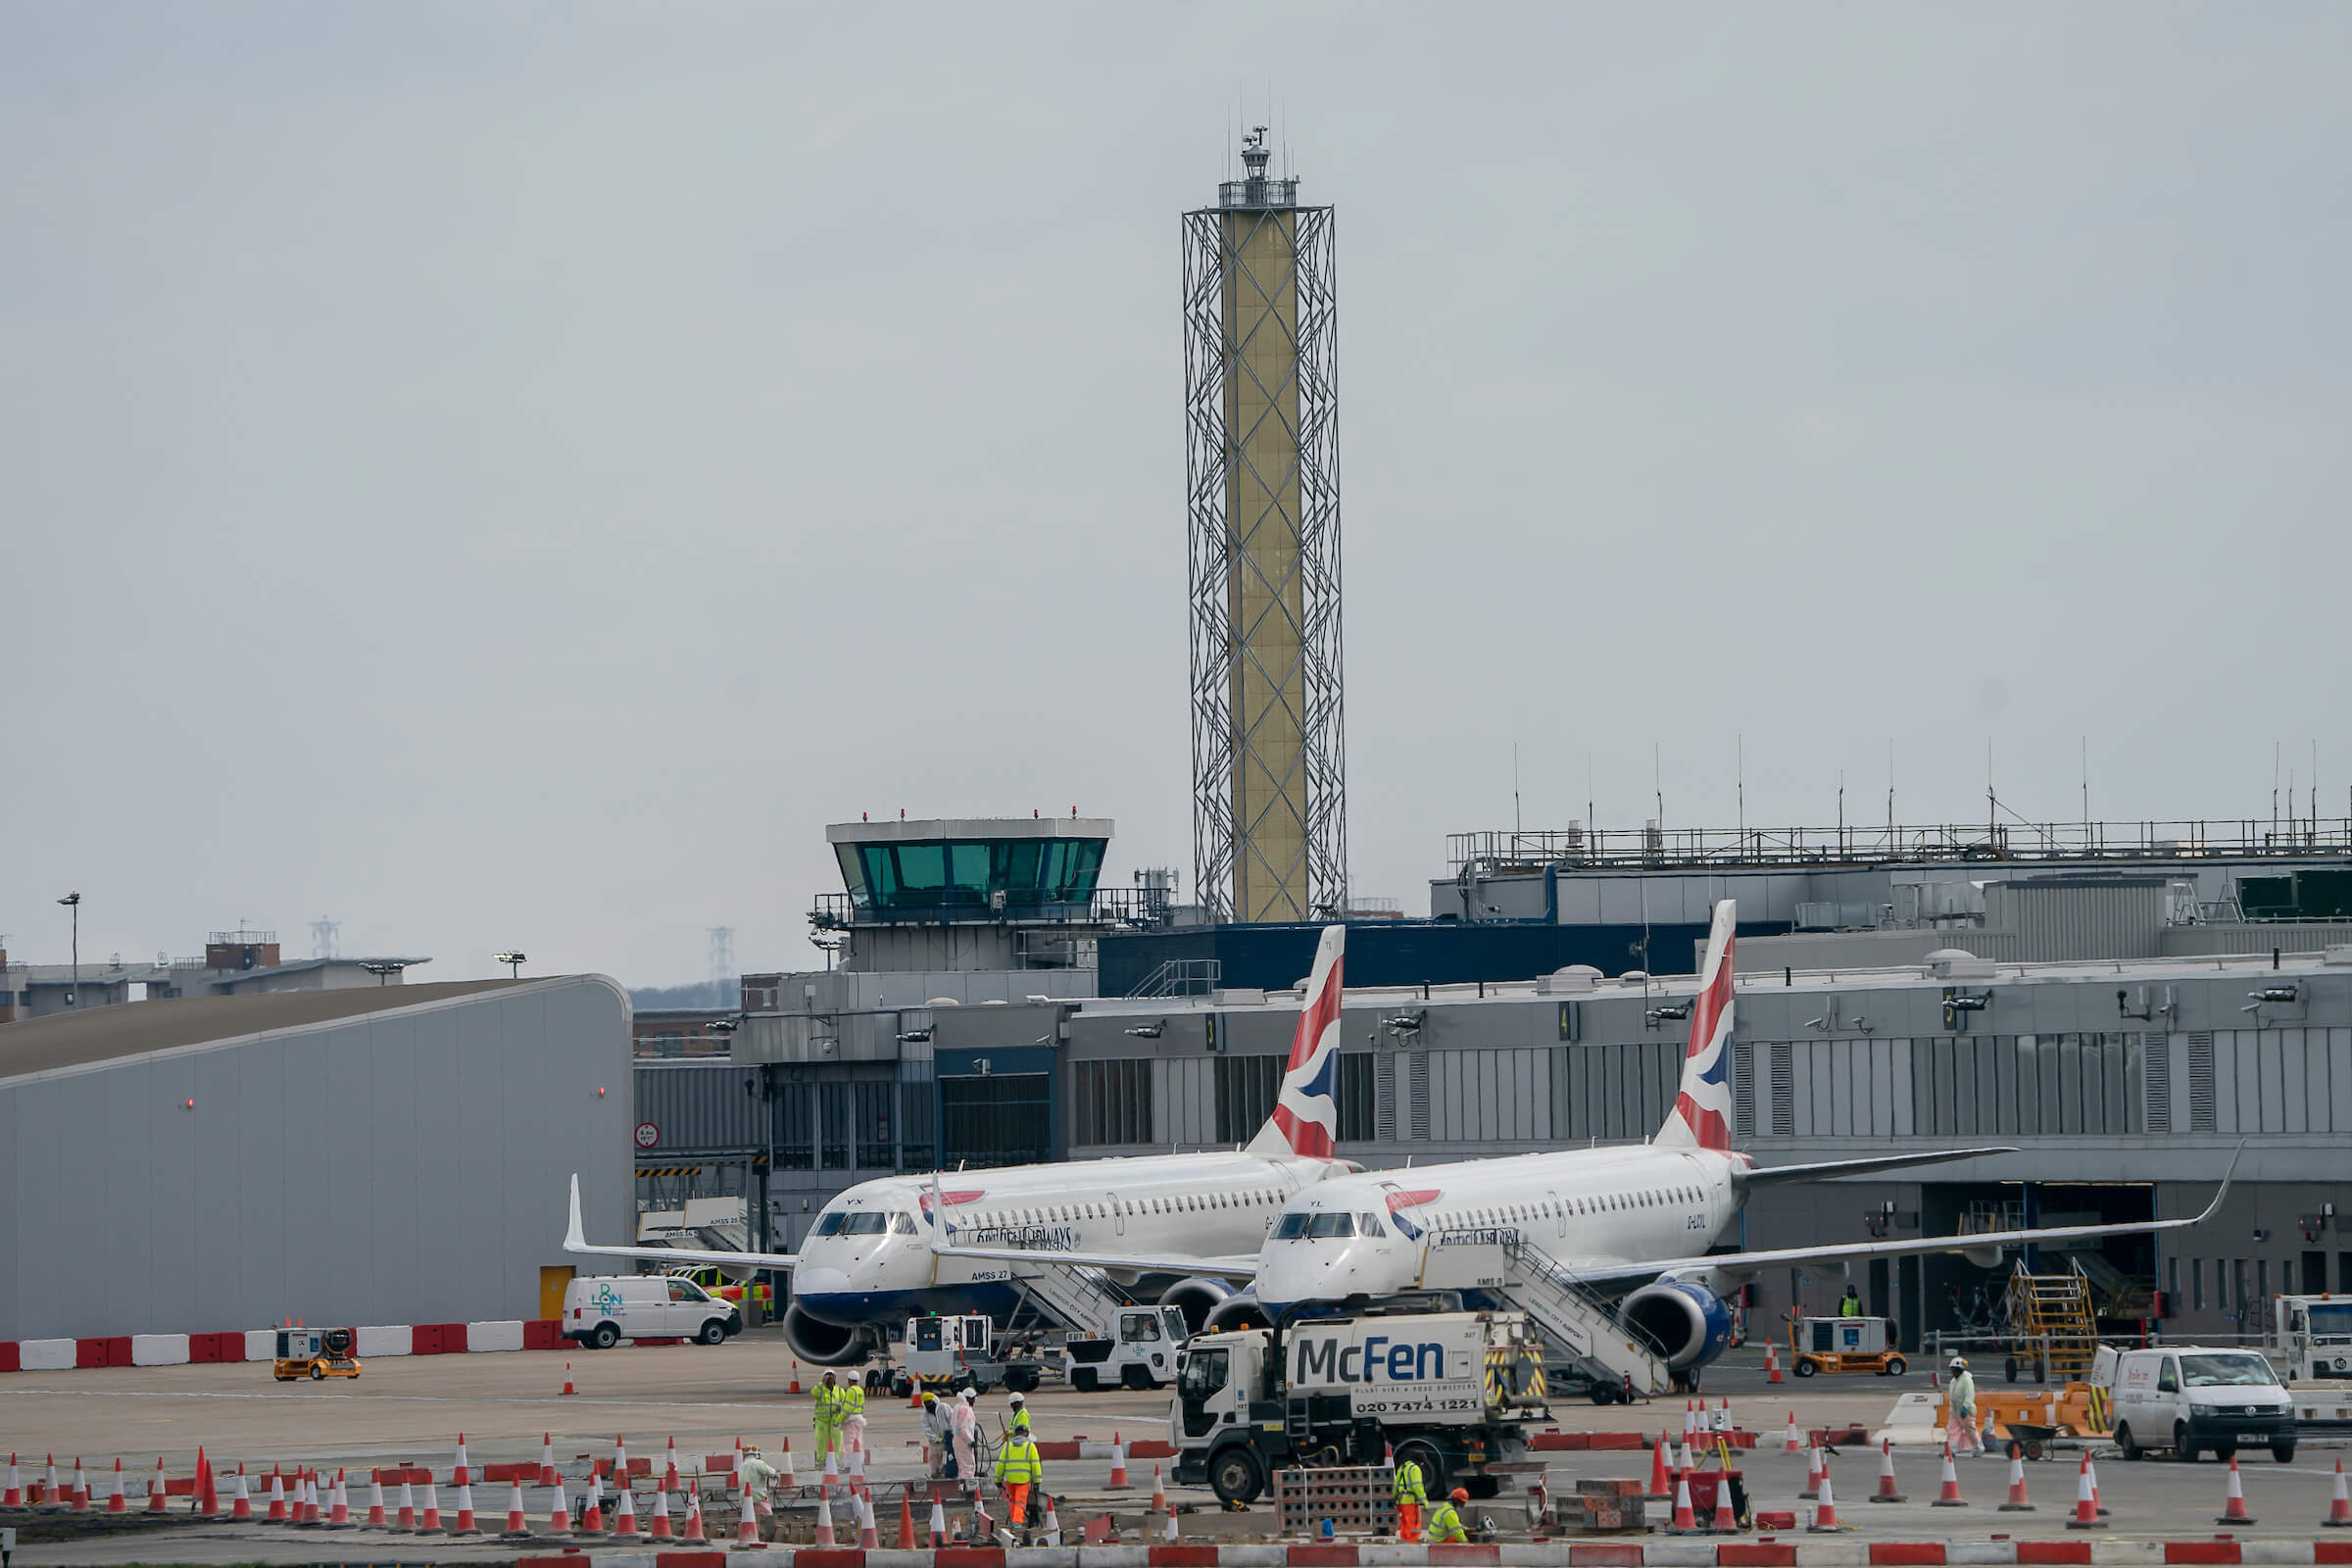 London City Airport introduces remote ATC tower - AeroTime